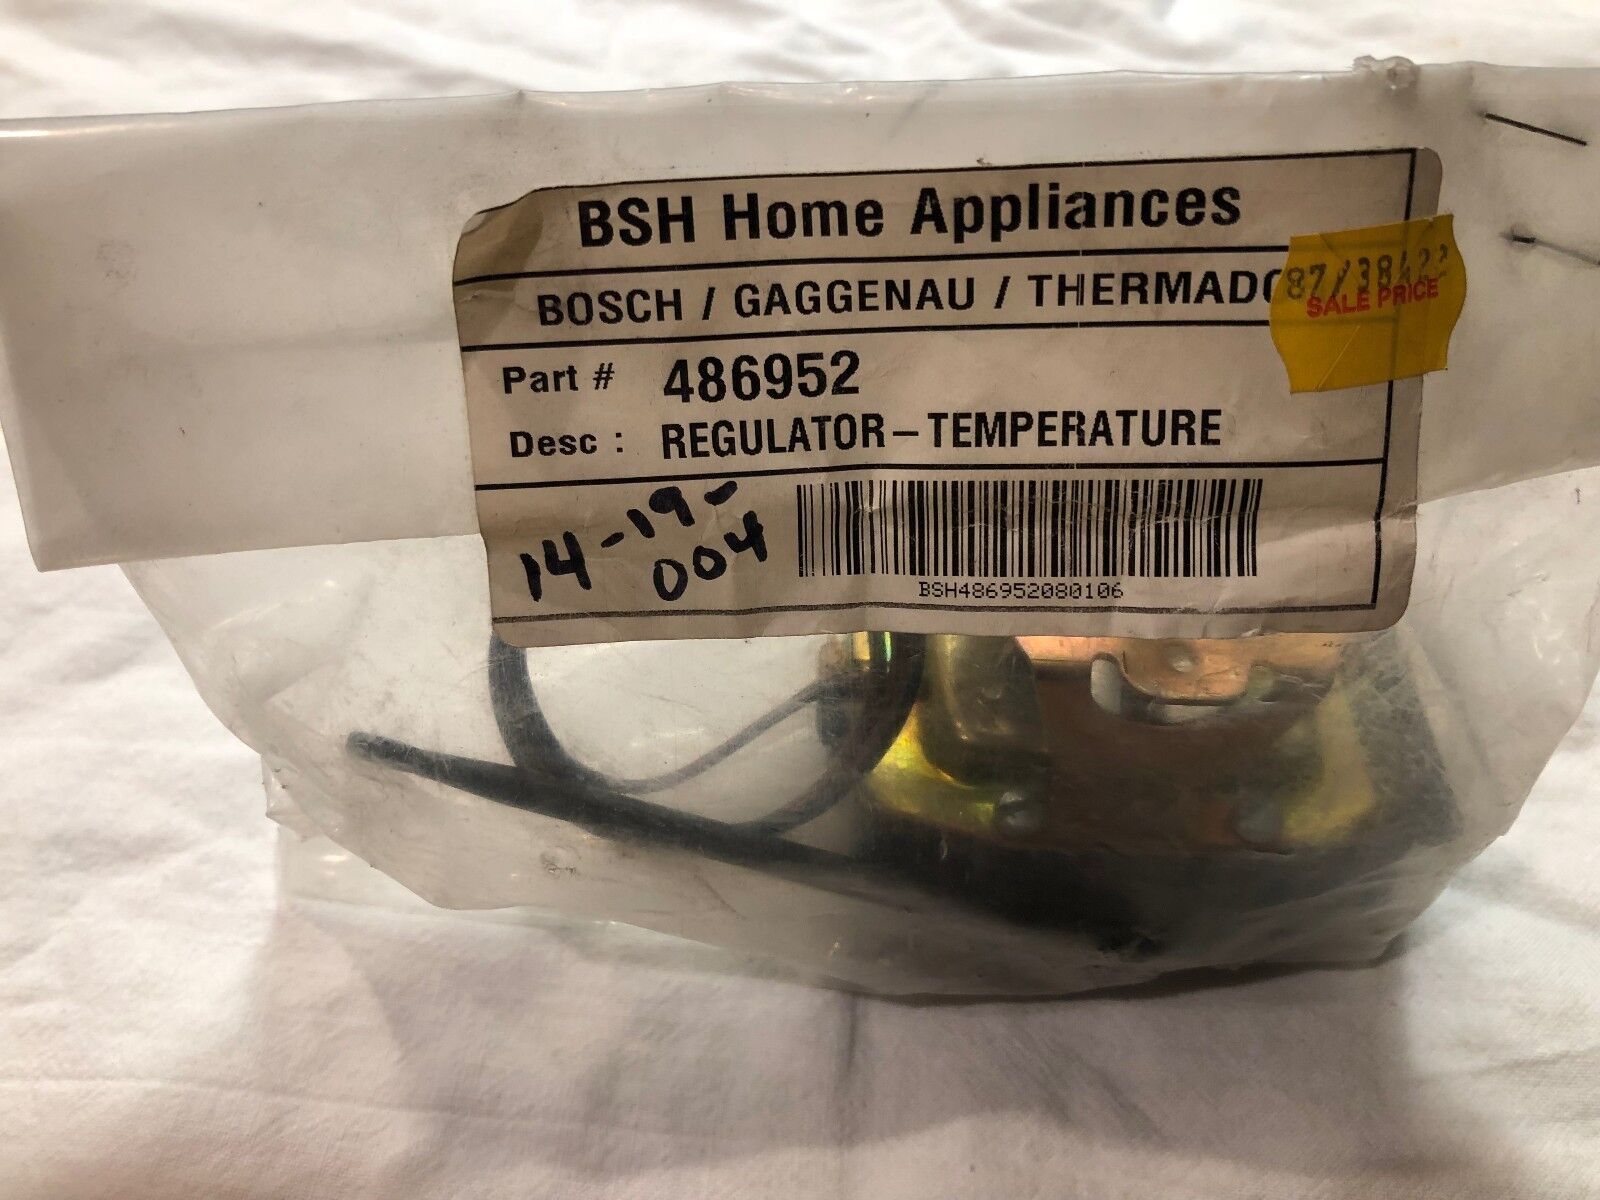 14-19-004 486952 00486952 THERMADOR OVEN TEMPERATURE REGULATOR NEW HARD TO FIND